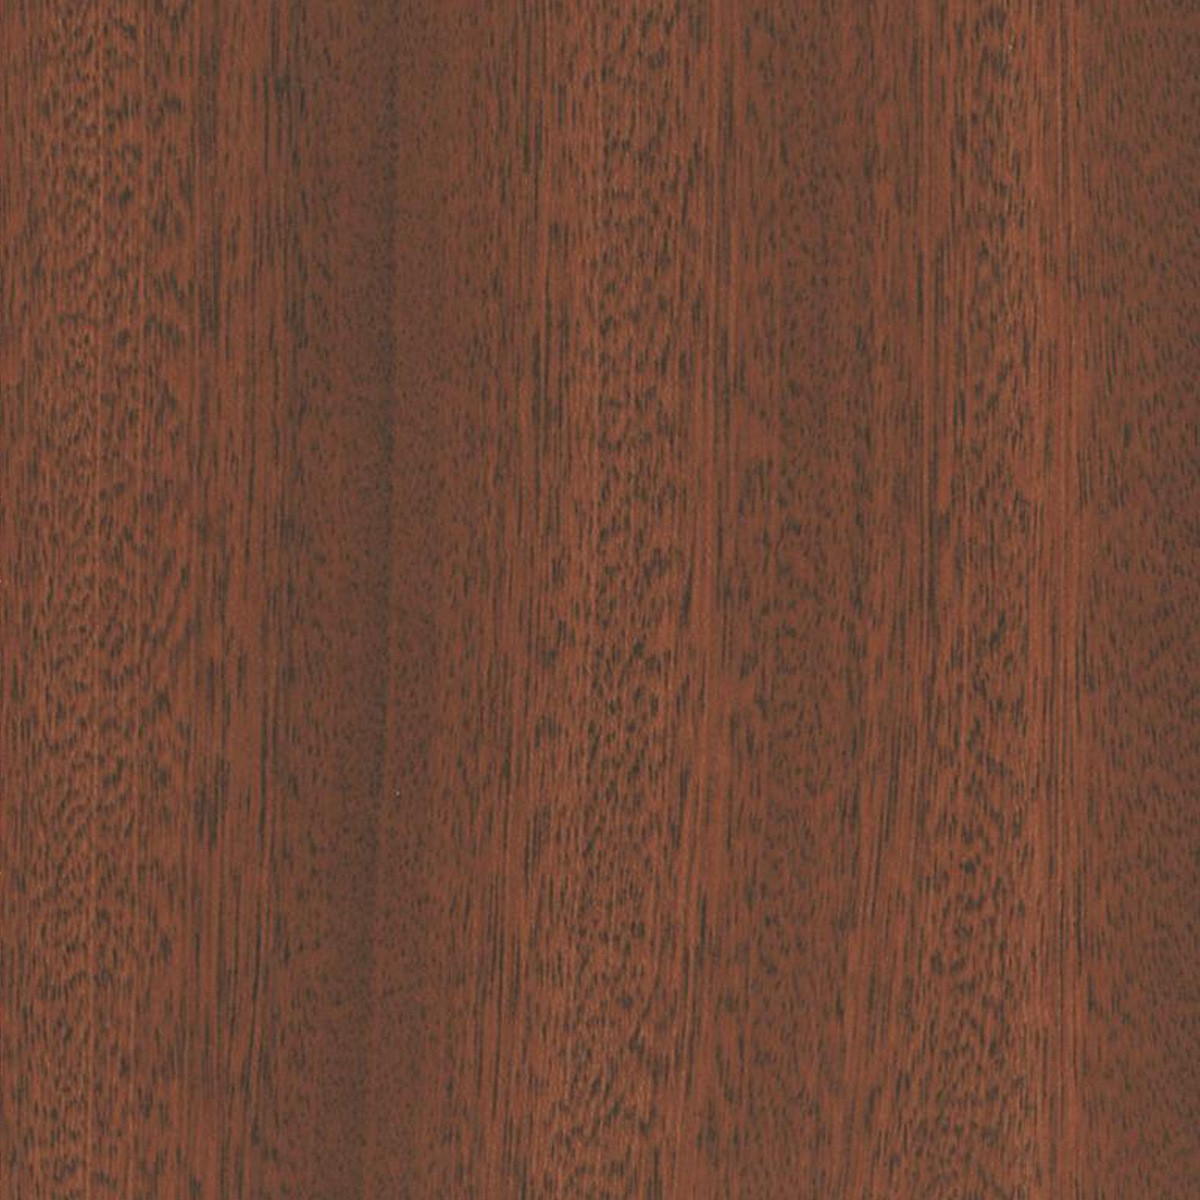 23 Fantastic Hardwood Flooring Lawrenceville Nj 2024 free download hardwood flooring lawrenceville nj of flooring design ideas find ideas and inspiration for flooring in 35 awesome click flooring collection